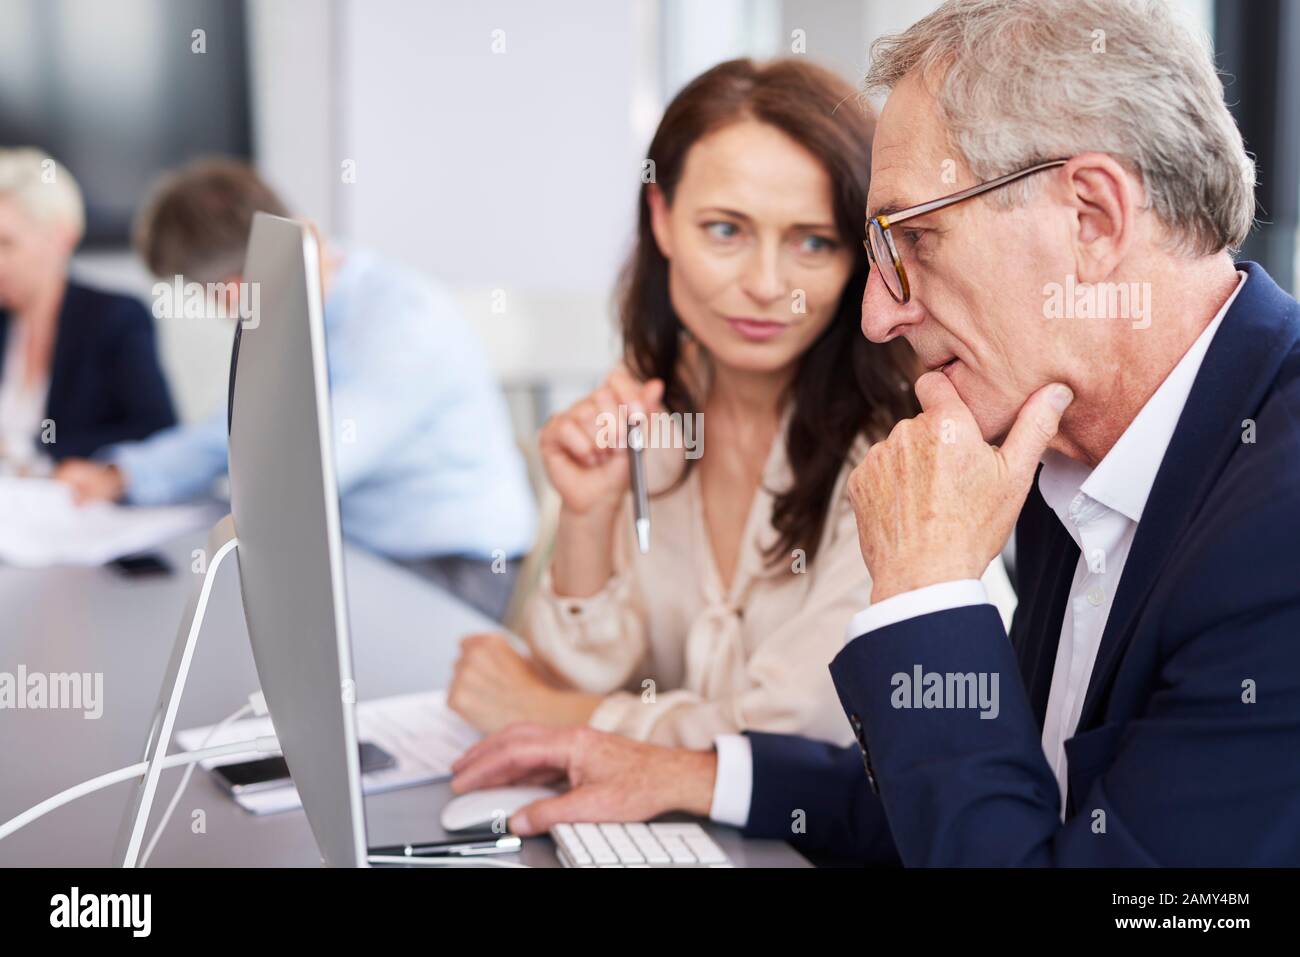 Busy businessman using a computer during business meeting Stock Photo